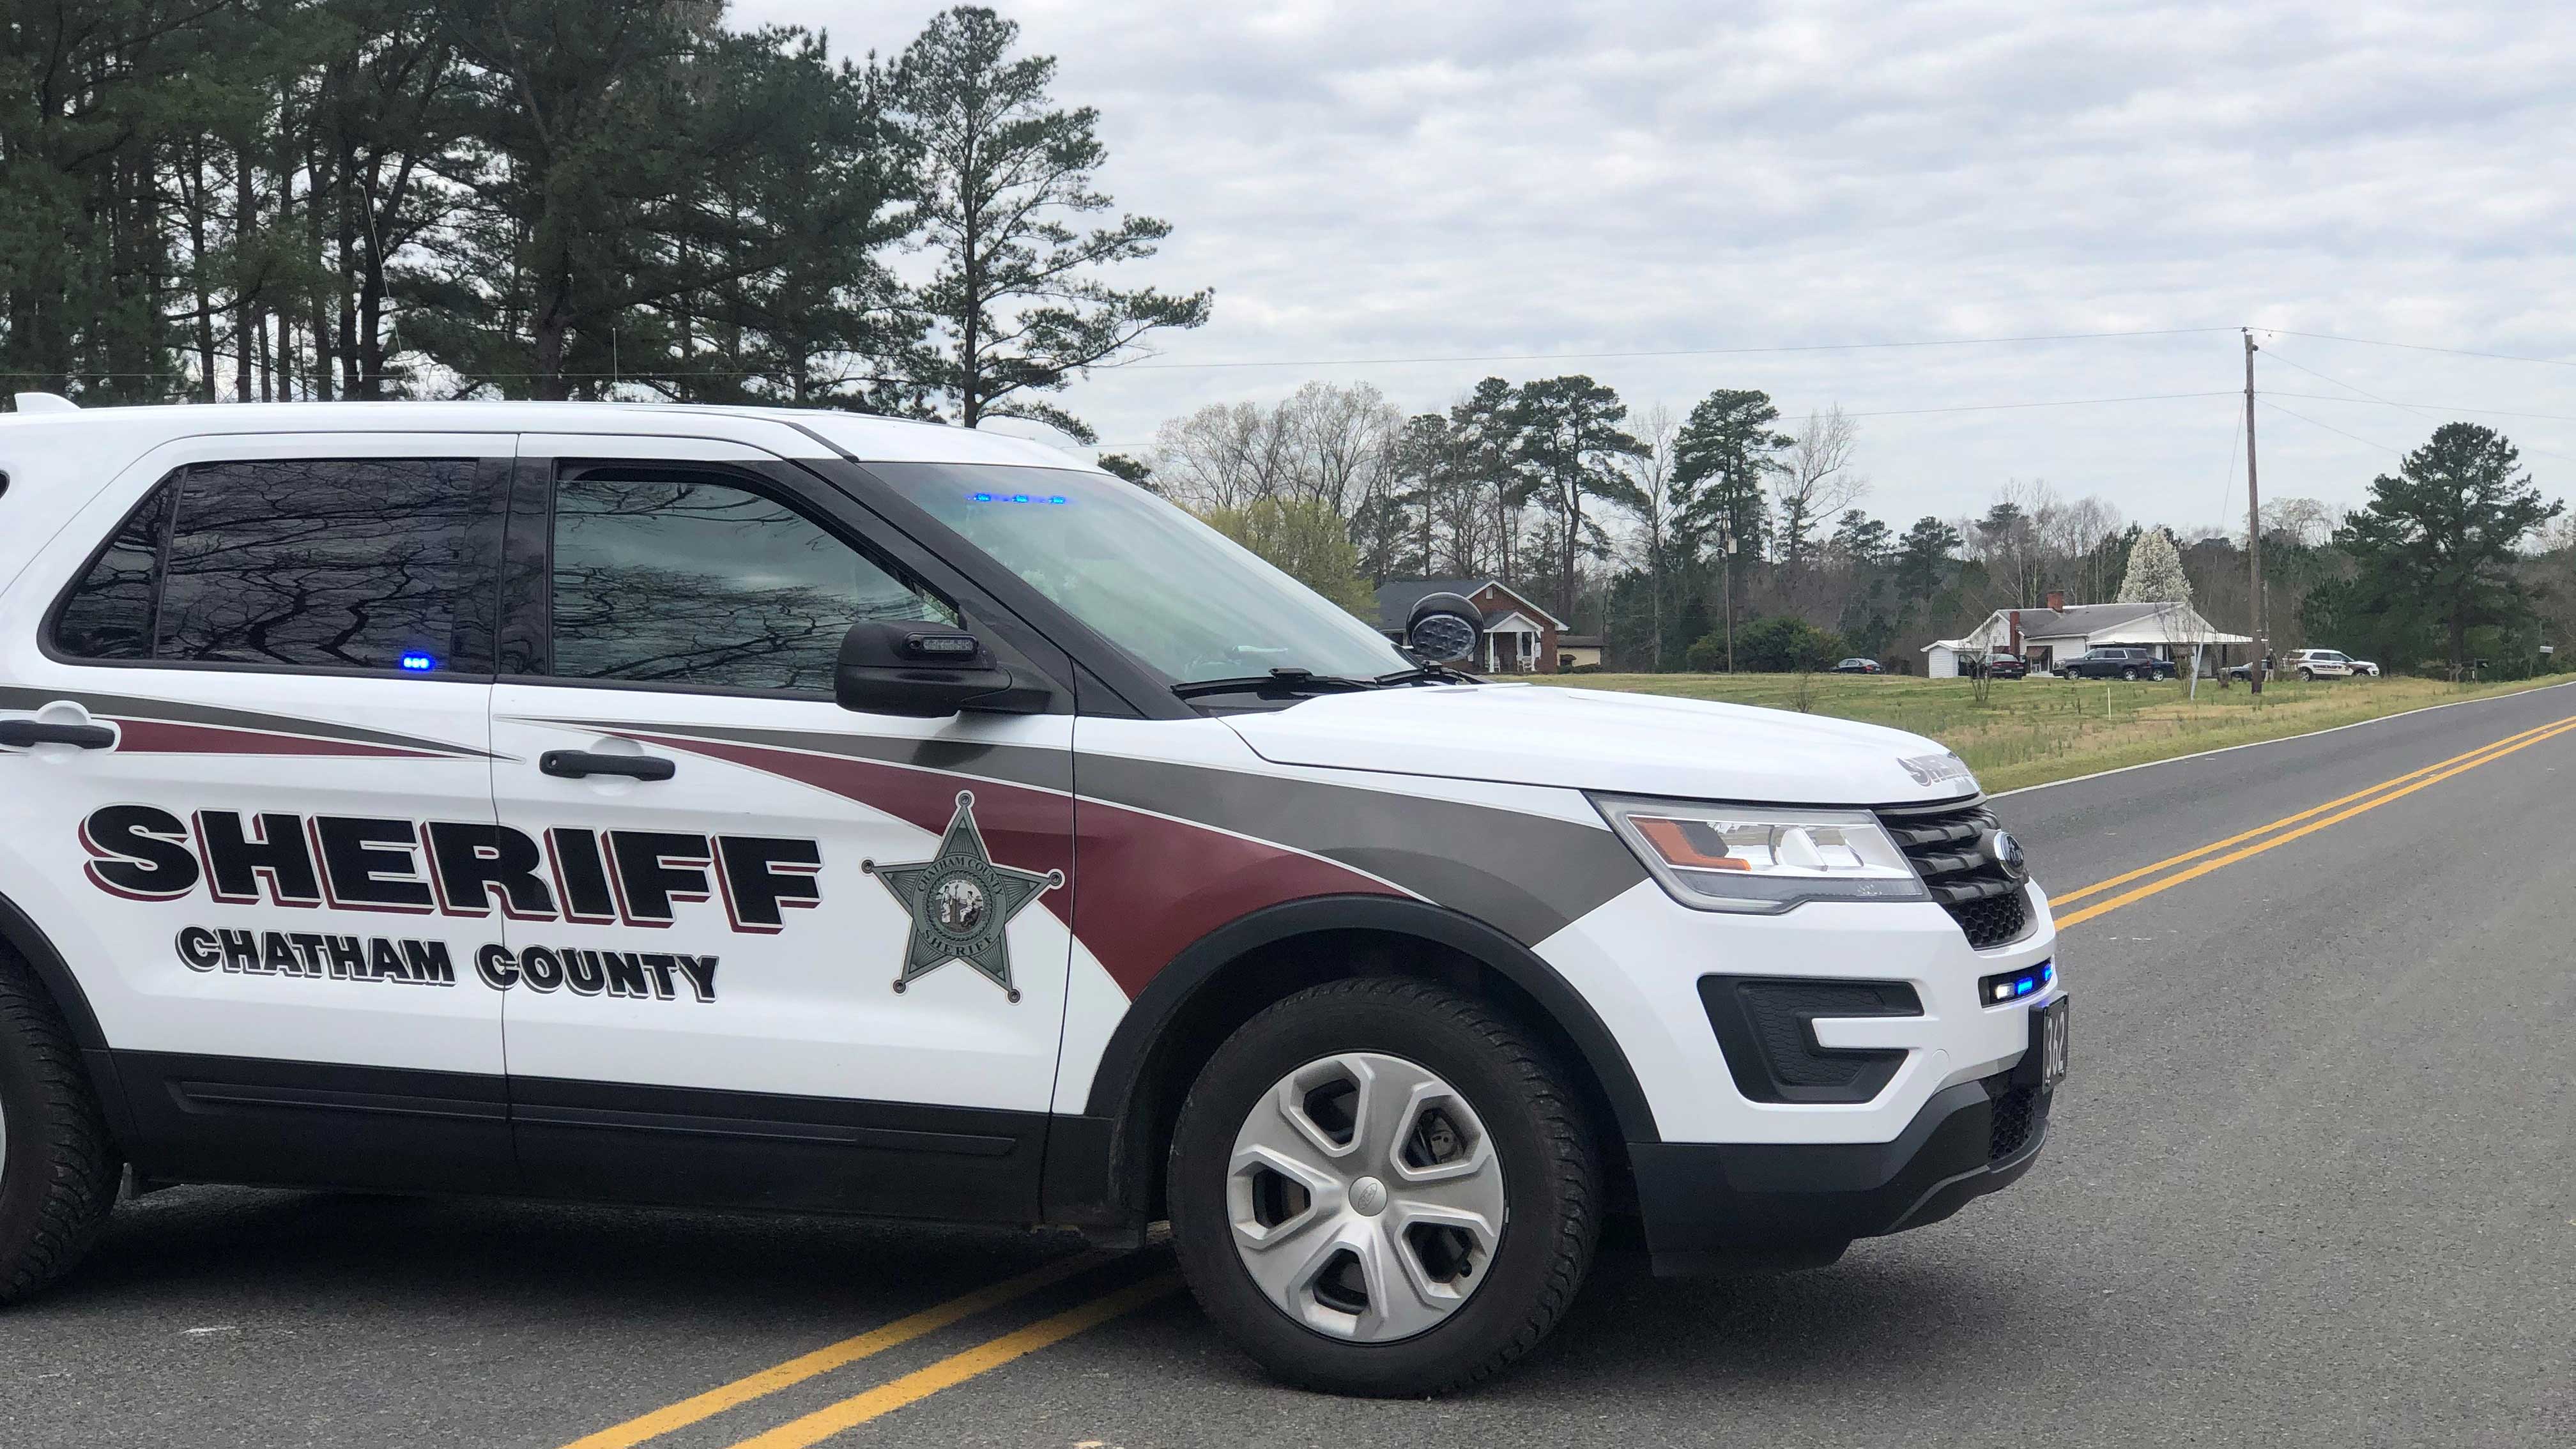 Chatham County Sheriff Second Man Arrested for Shooting Teen